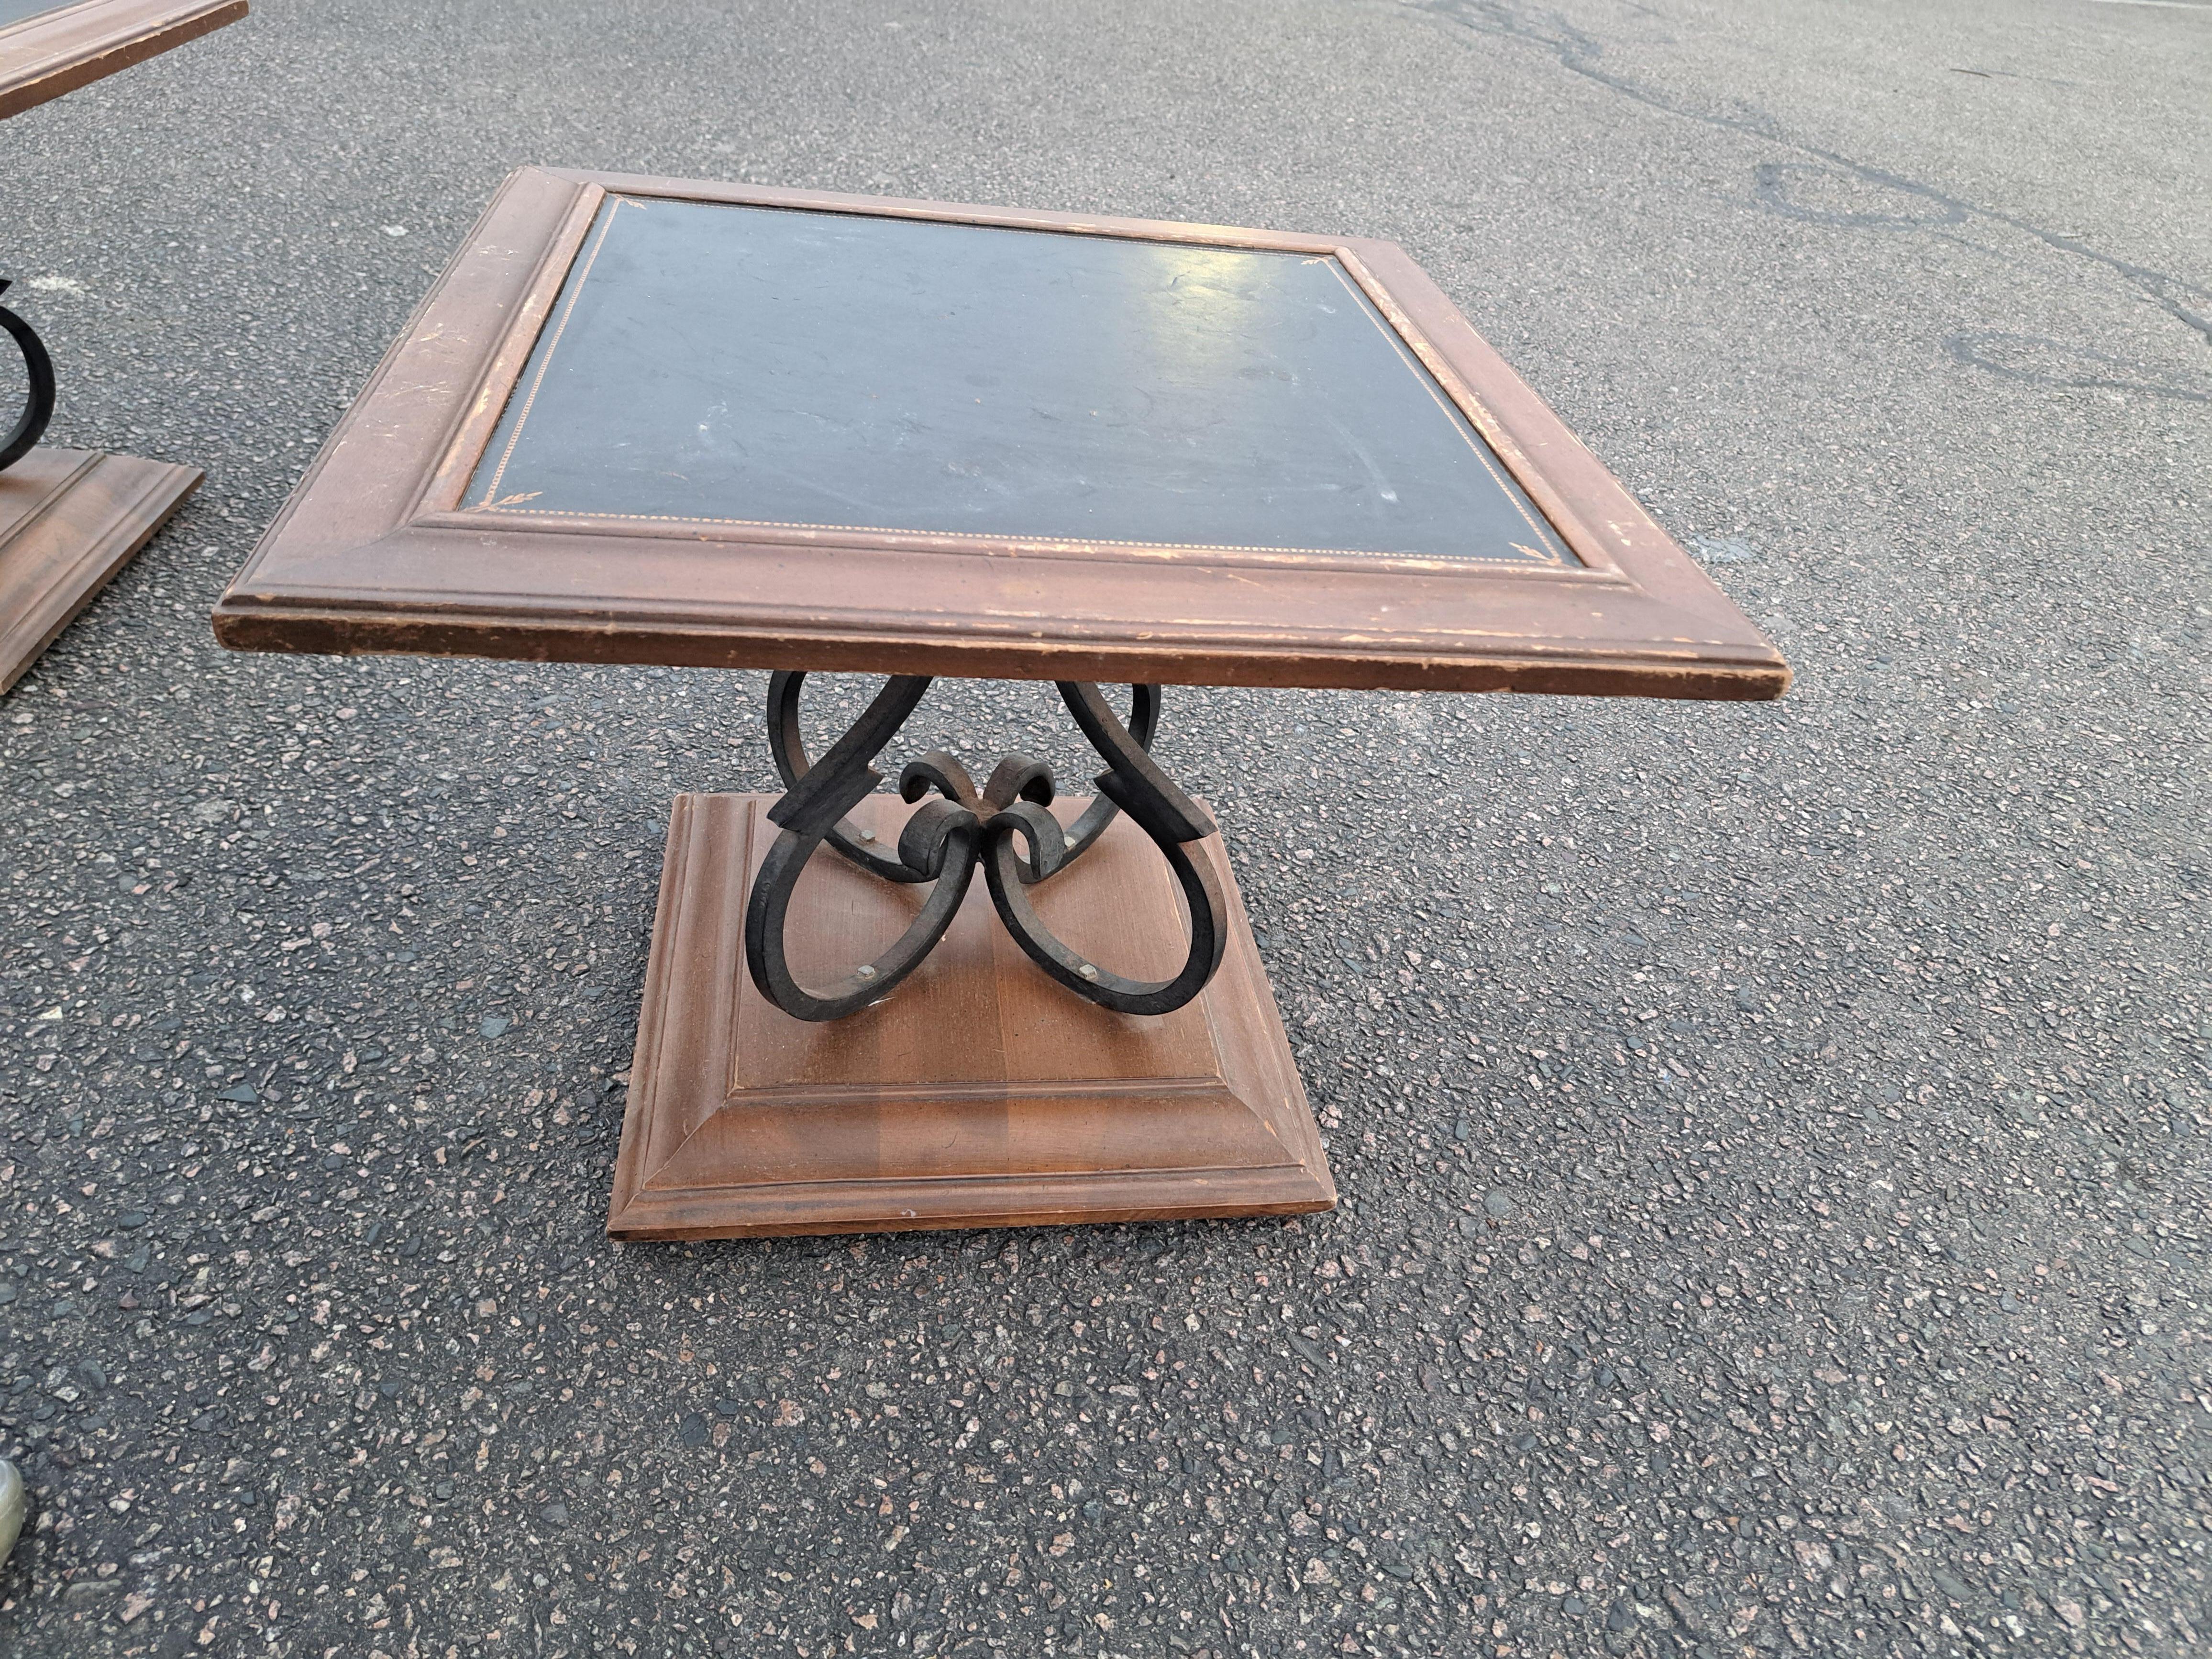 Pair of vintage low side tables with scrolled wrought iron bases and wood and leather top. Table tops swivel.